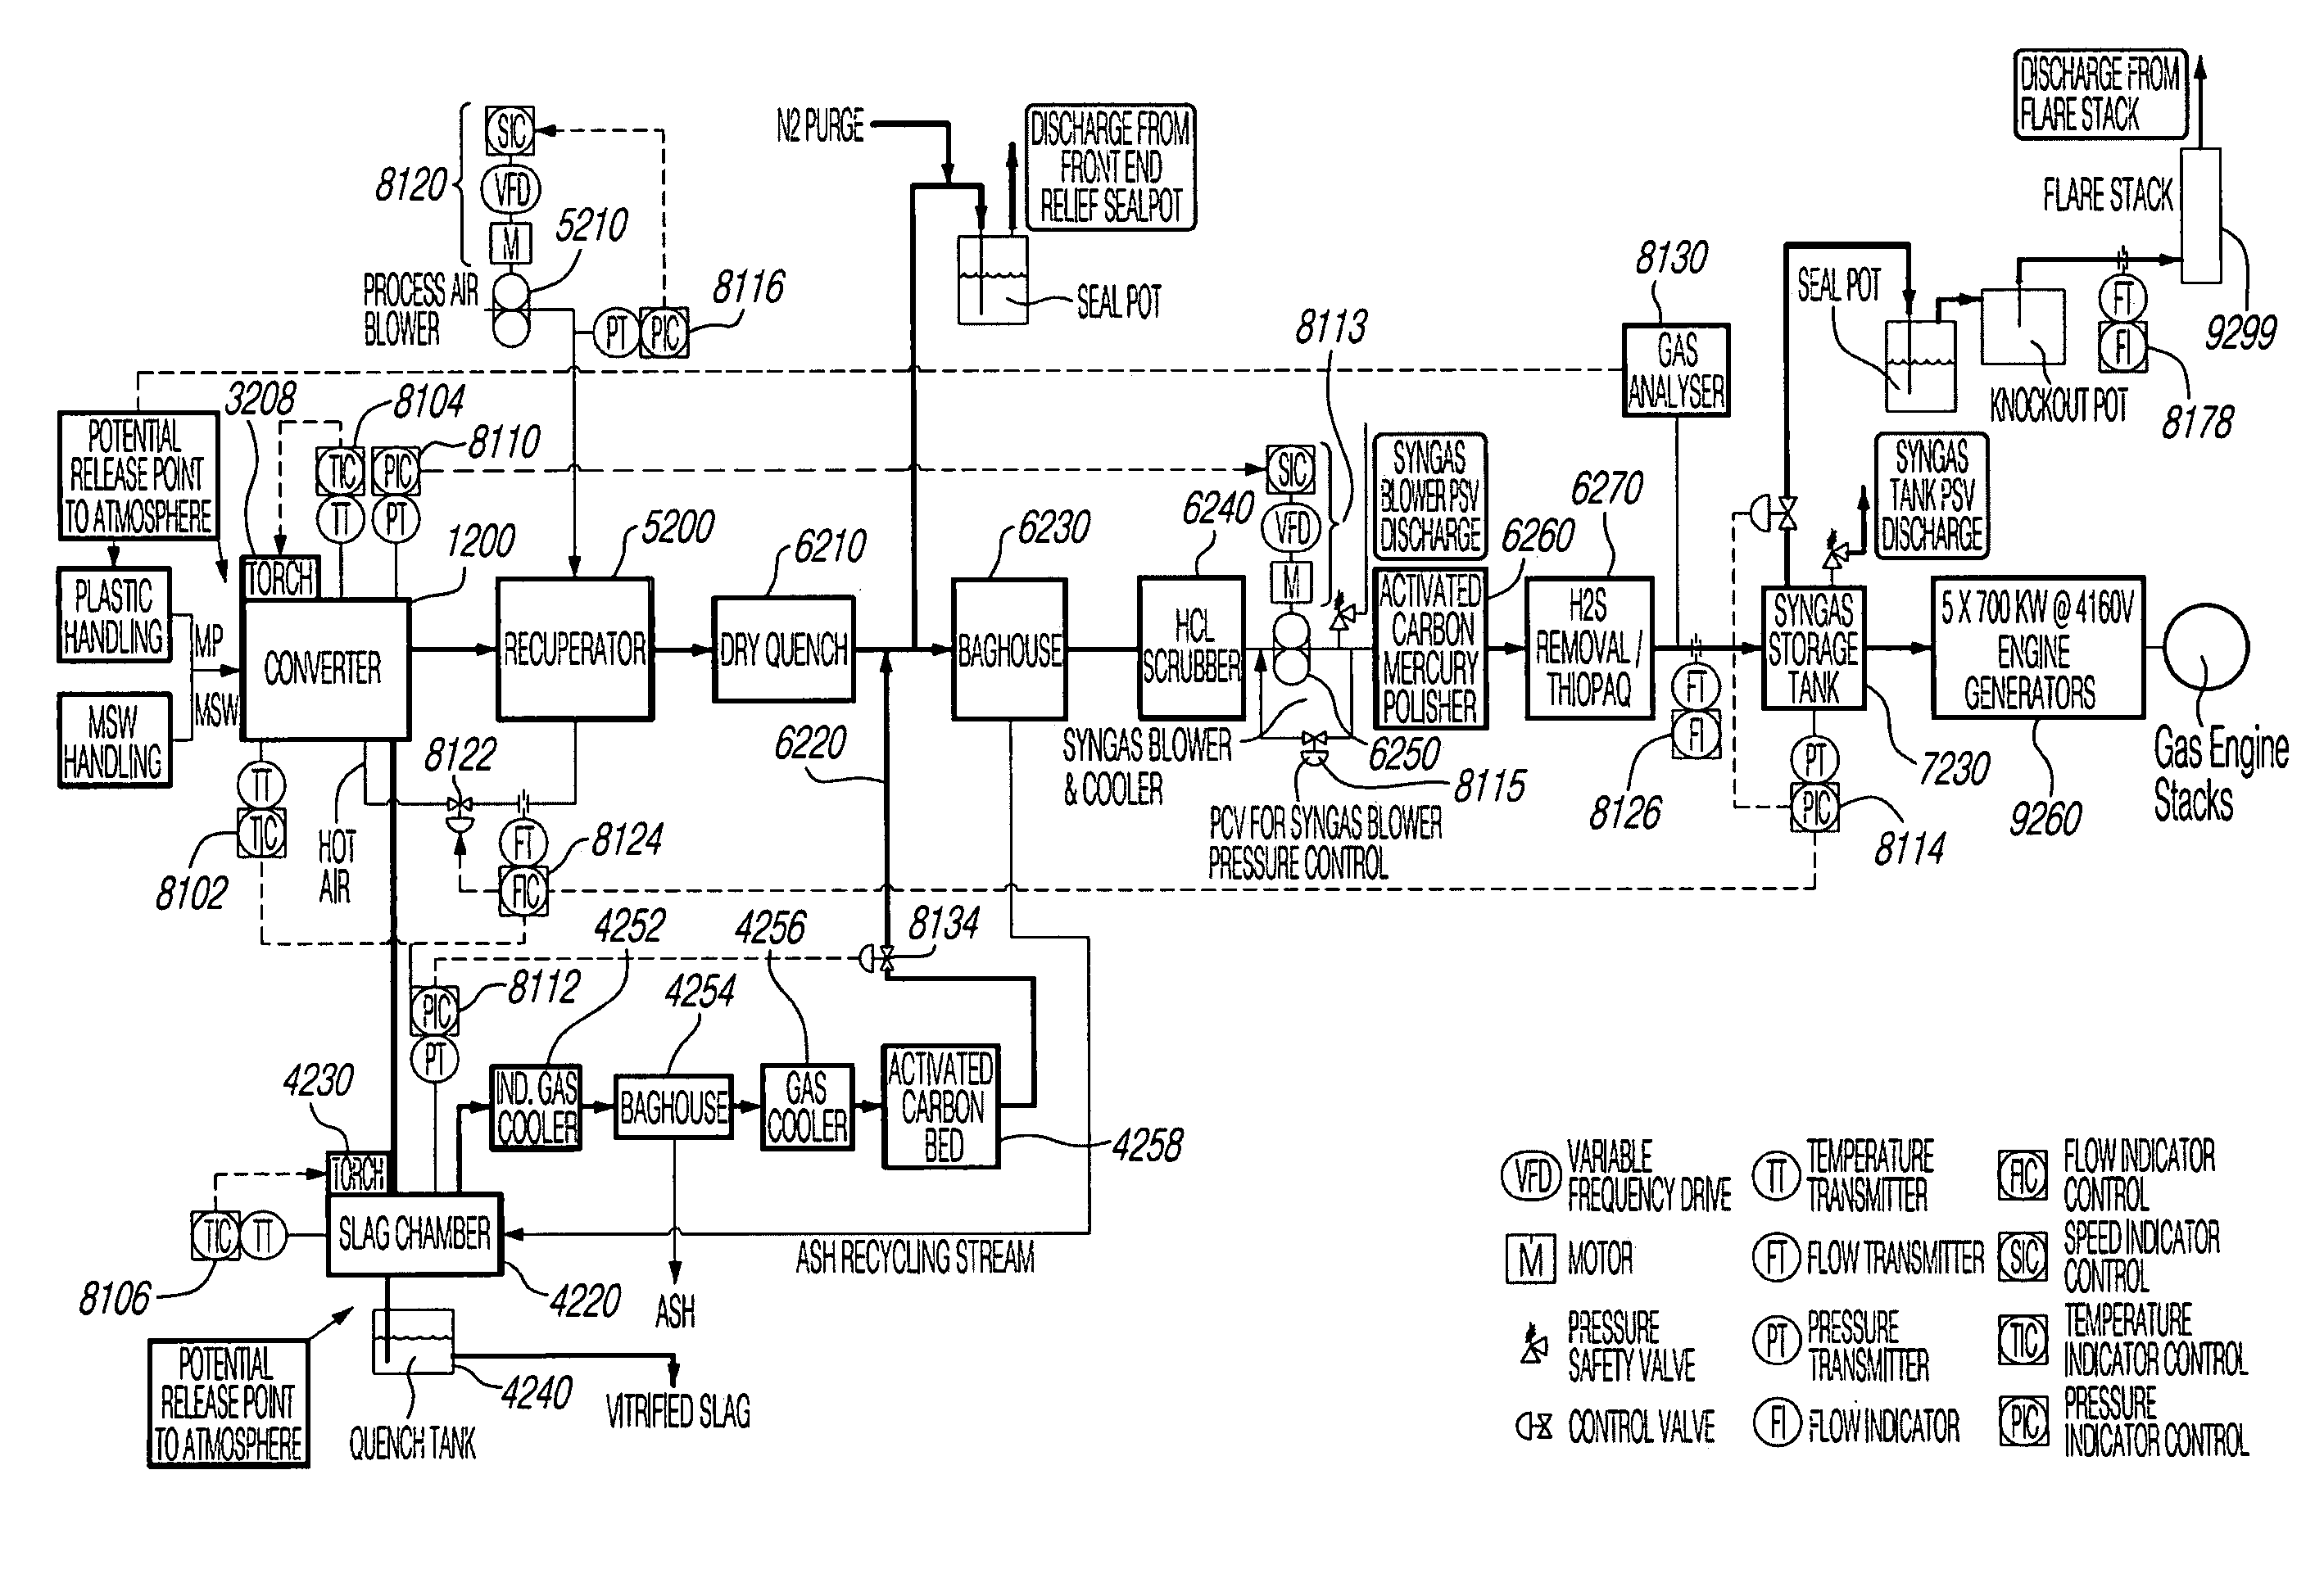 Low Temperature Gasification Facility with a Horizontally Oriented Gasifier